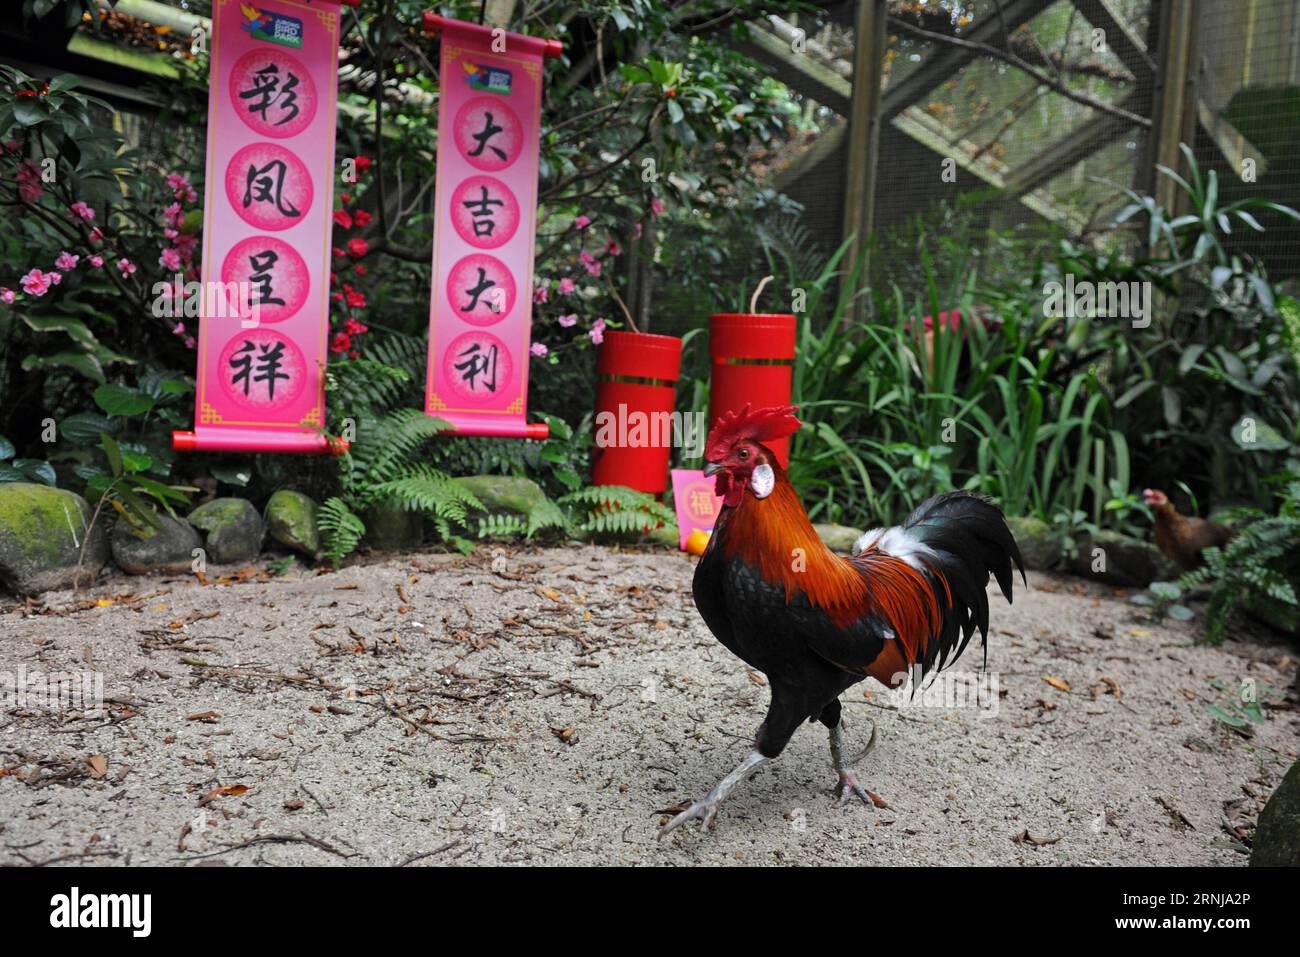 A red junglefowl is seen near lunar New Year decorations in Singapore s Jurong Bird Park, Jan. 11, 2017. The Jurong Bird Park unveiled the Fowl Trail on Wednesday, showcasing an assortment of pheasants, peafowls and junglefowls as part of the celebrations for the upcoming Year of Rooster. ) (hy) SINGAPORE-JURONG BIRD PARK-FOWL TRAIL ThenxChihxWey PUBLICATIONxNOTxINxCHN   a Red Junglefowl IS Lakes Near Lunar New Year decorations in Singapore S Jurong Bird Park Jan 11 2017 The Jurong Bird Park unveiled The Fowl Trail ON Wednesday showcasing to assortment of pheasants peafowls and  As Part of The Stock Photo